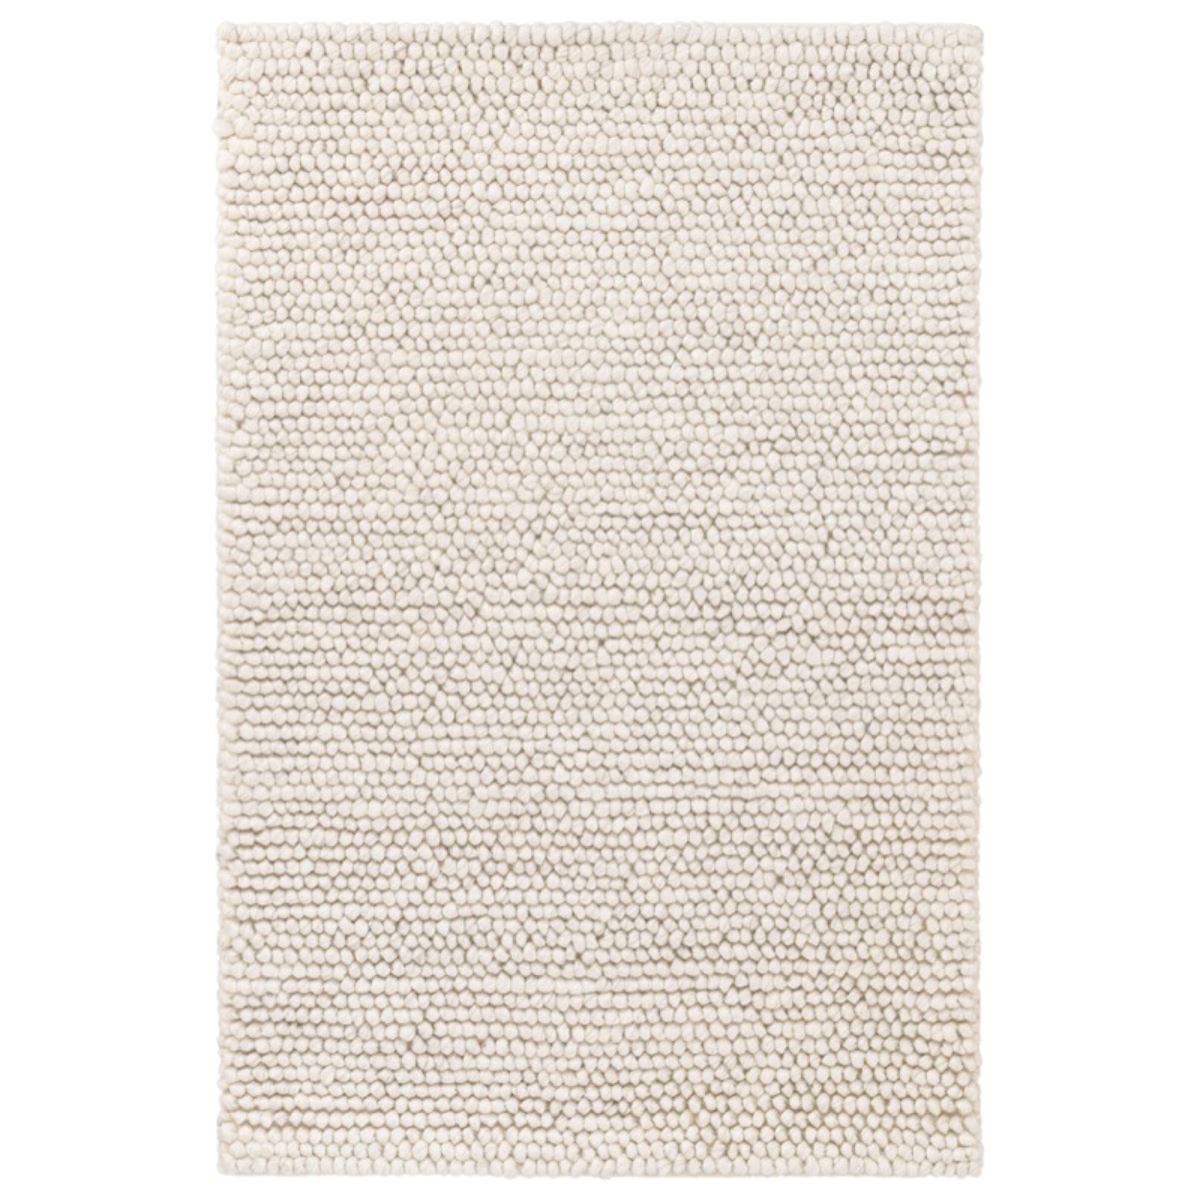 Niels Ivory Woven Wool/Viscose Rug. Top view. 